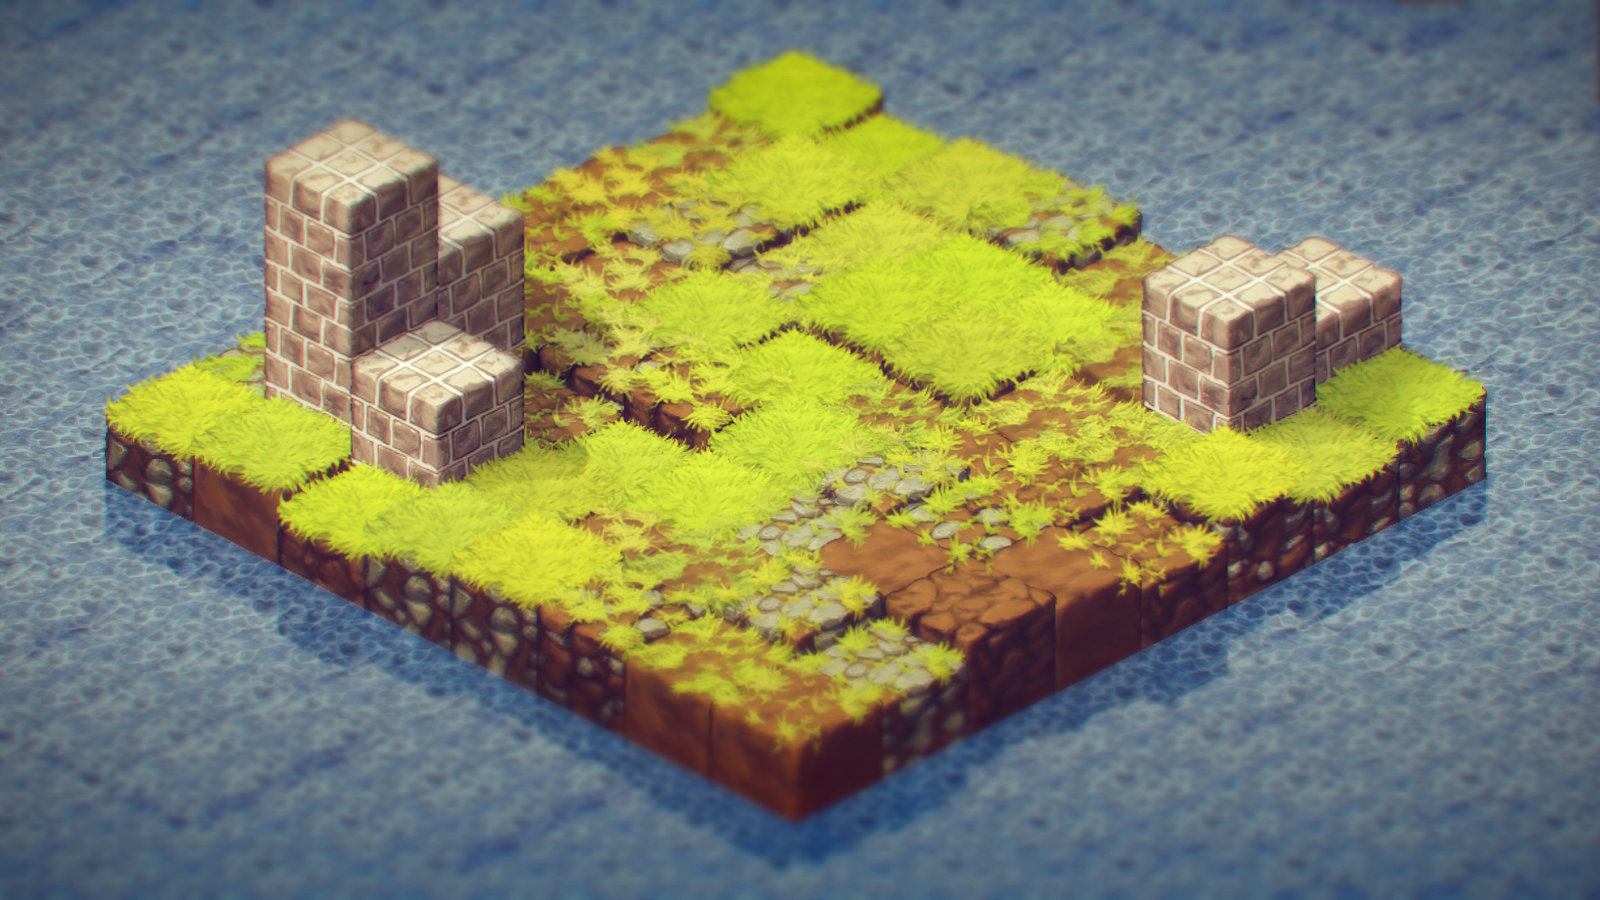 Quick post processing of an example world with overlays.